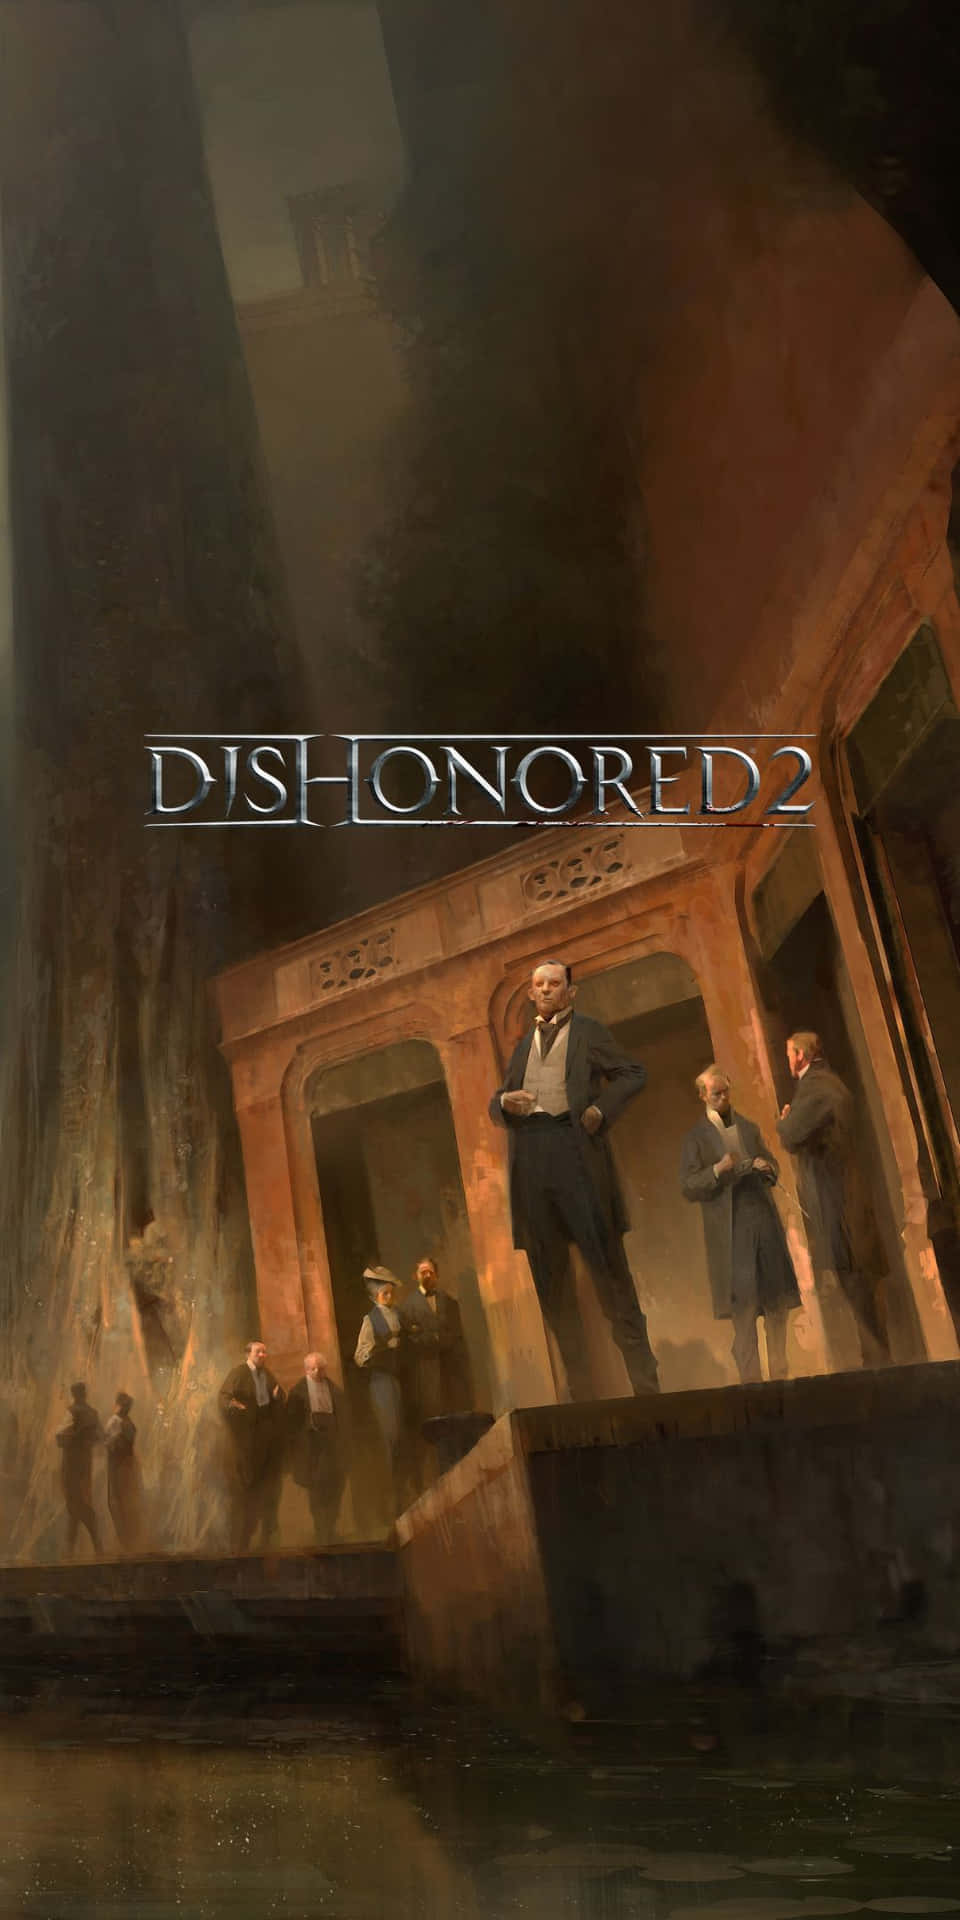 Utilize your supernatural abilities to traverse the world of Dishonored 2 on your Pixel 3